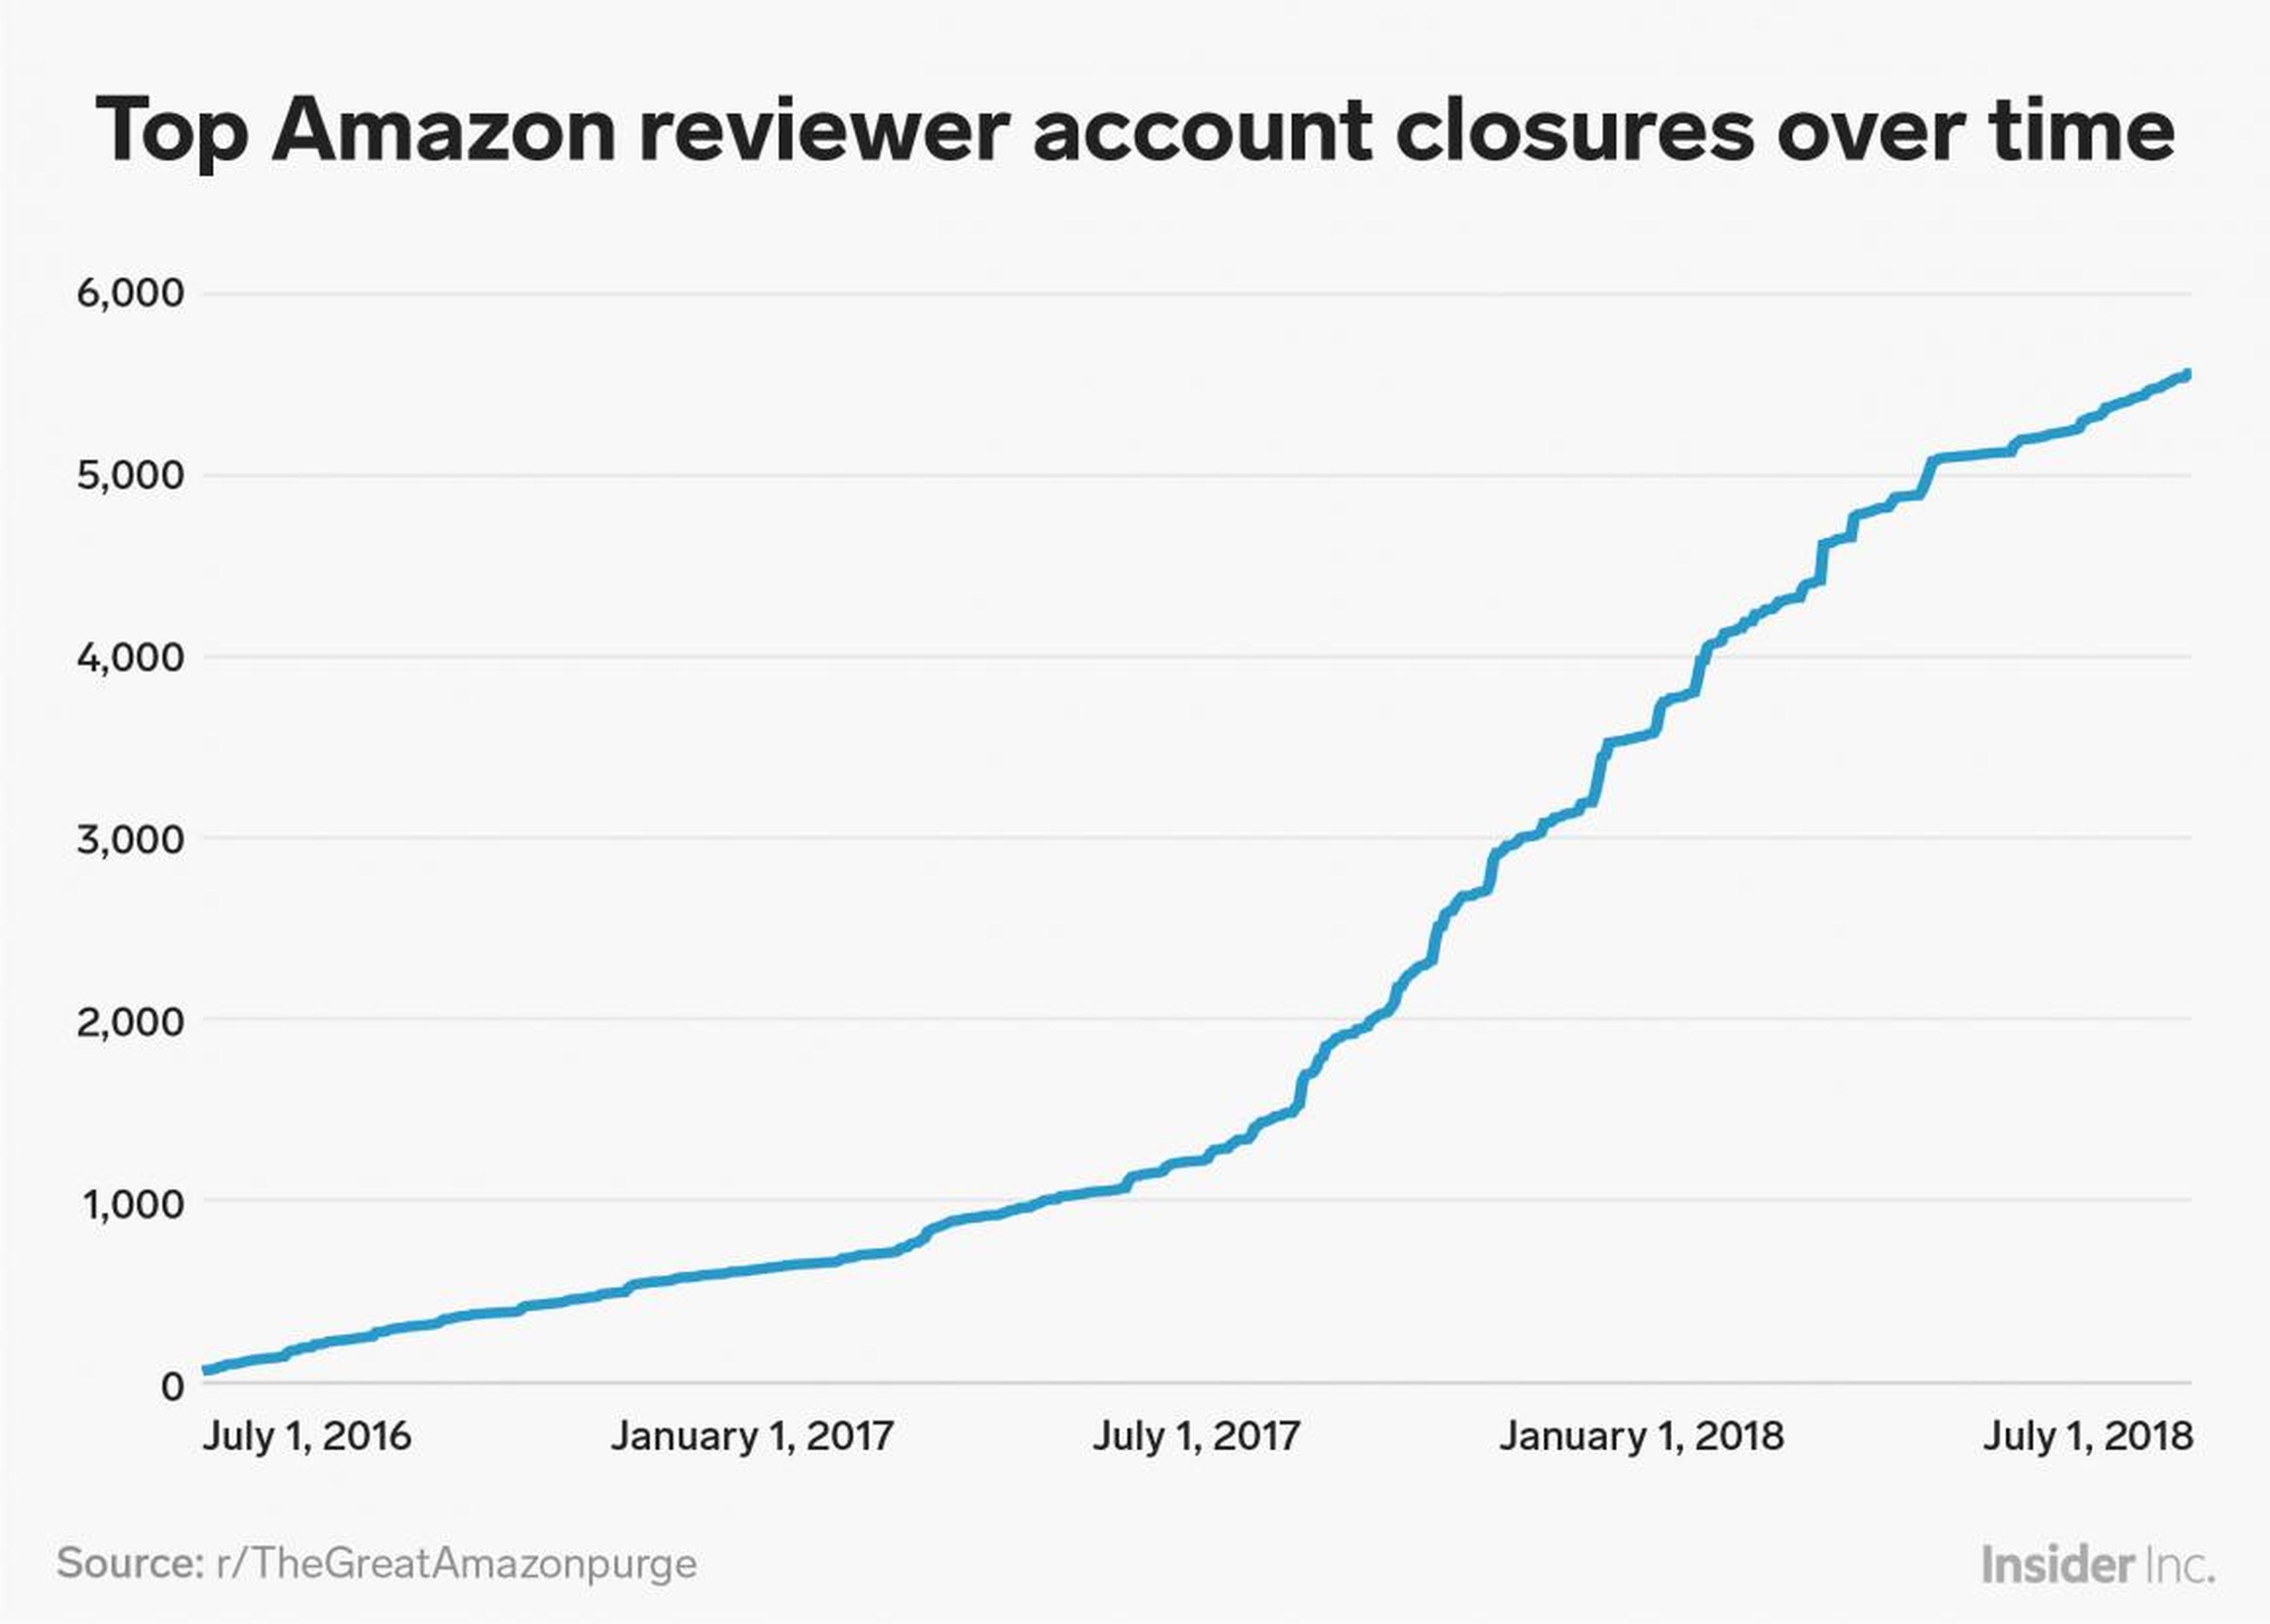 Data reveals Amazon has banned more than 5,700 of its top reviewers in the last 2 years as it increasingly cracks down on review abuse